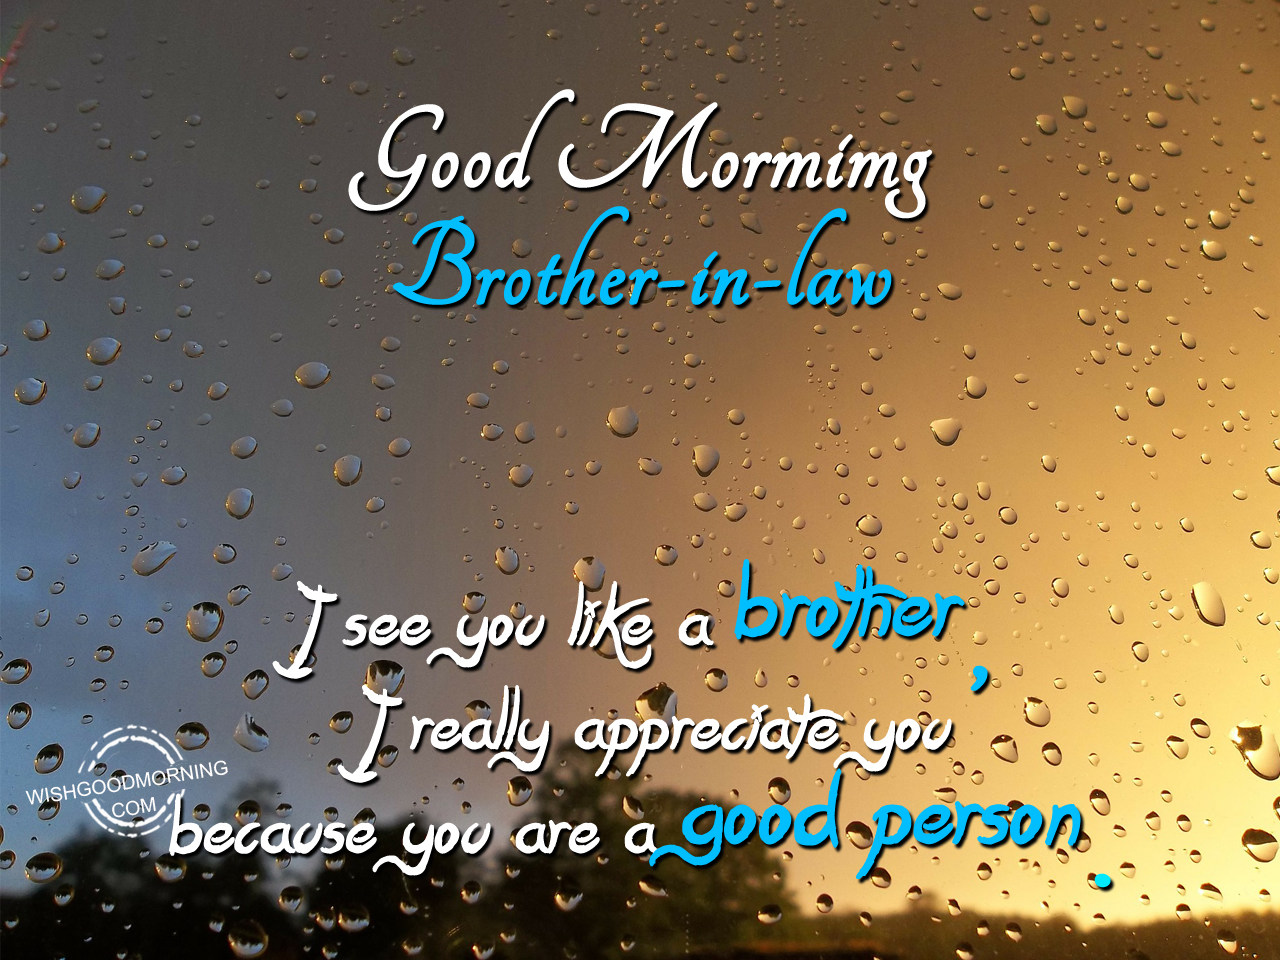 You are a good man - Good Morning Pictures – WishGoodMorning.com